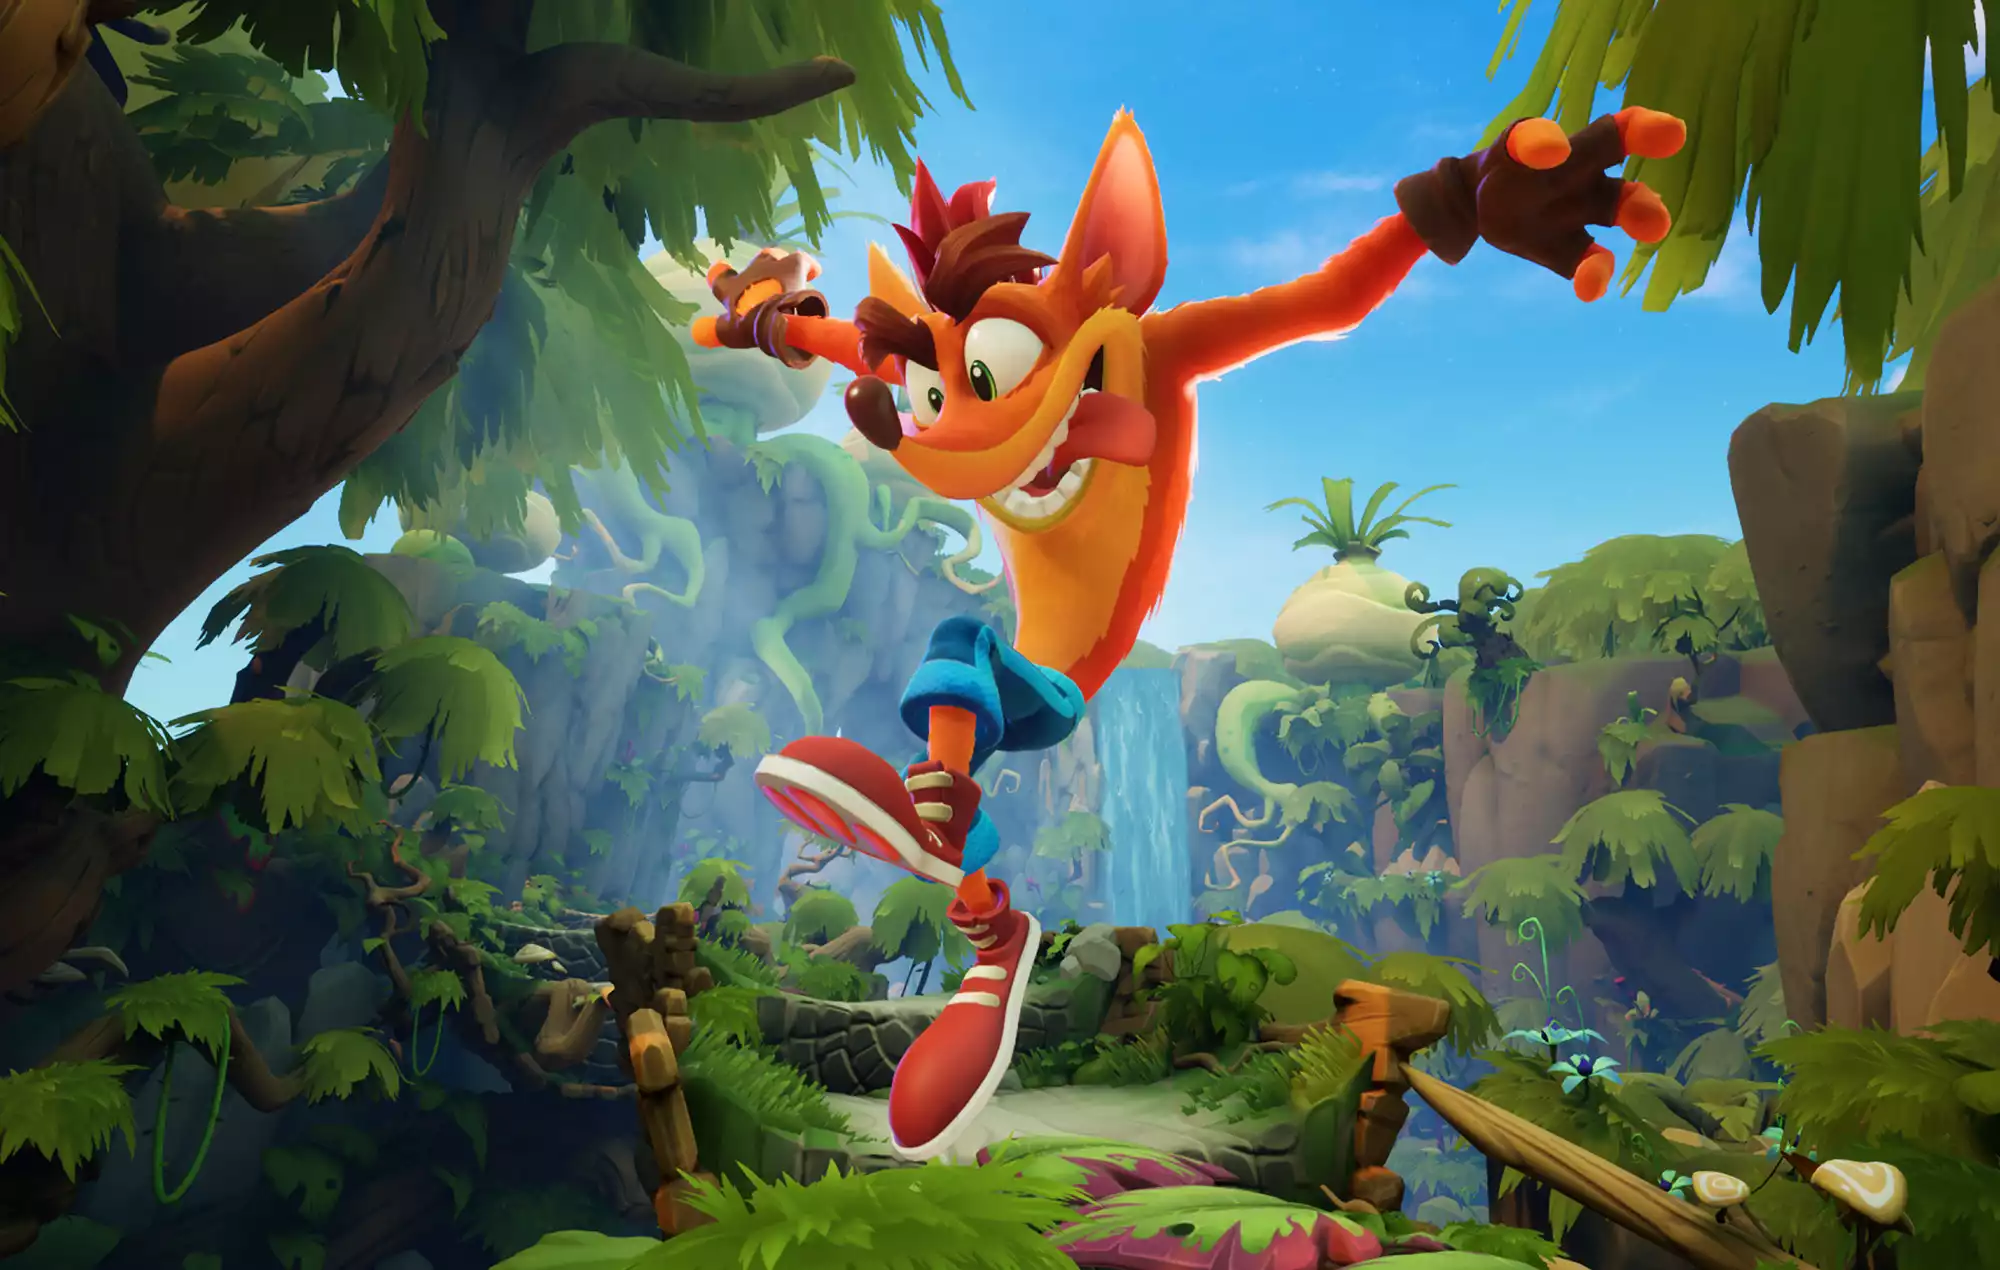 Crash and Spyro studio Toys For Bob partners with Xbox after going independent